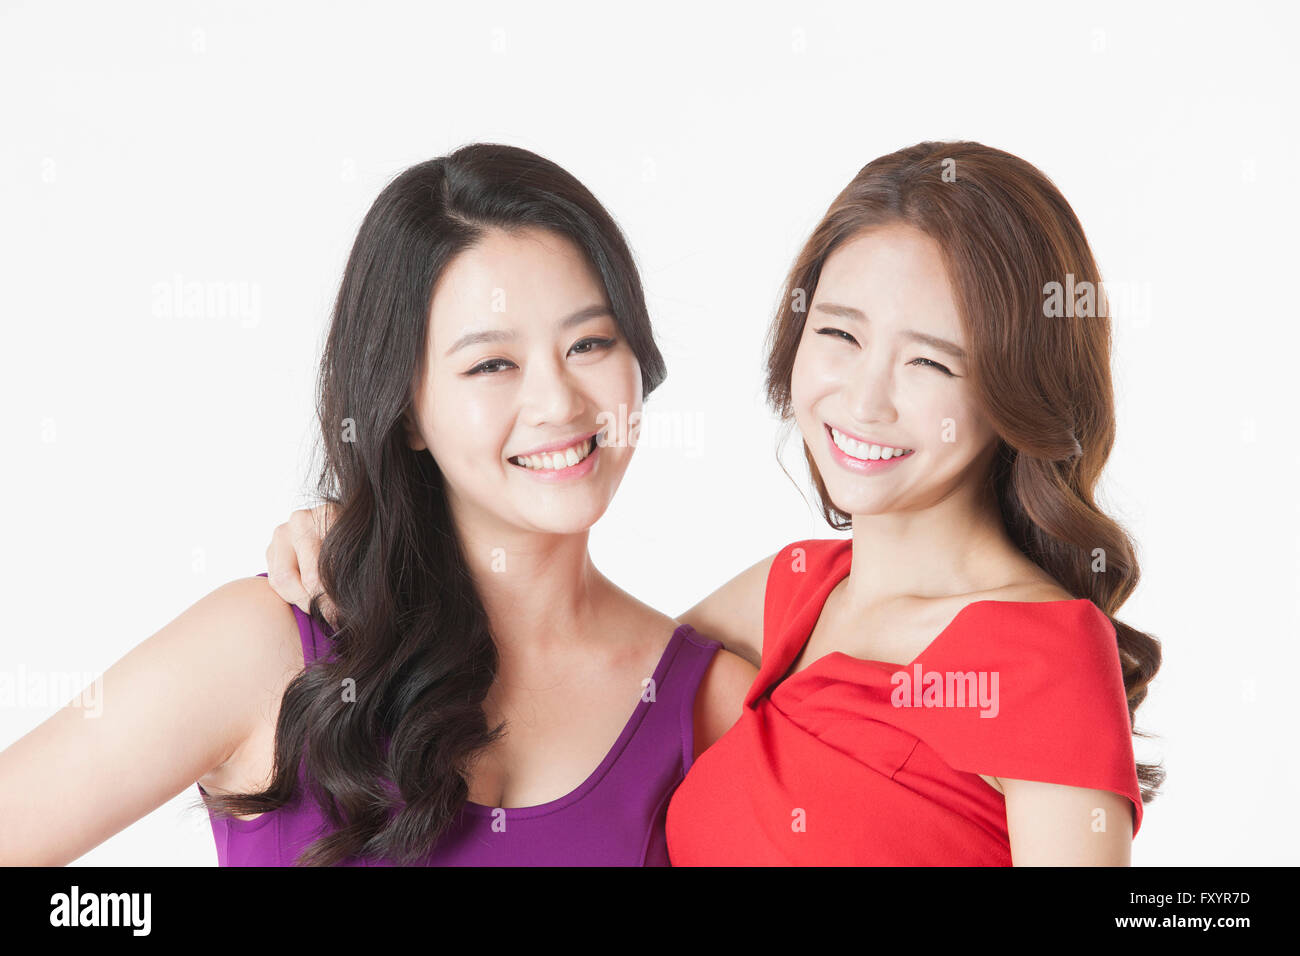 Portrait of two young smiling women staring at front Stock Photo